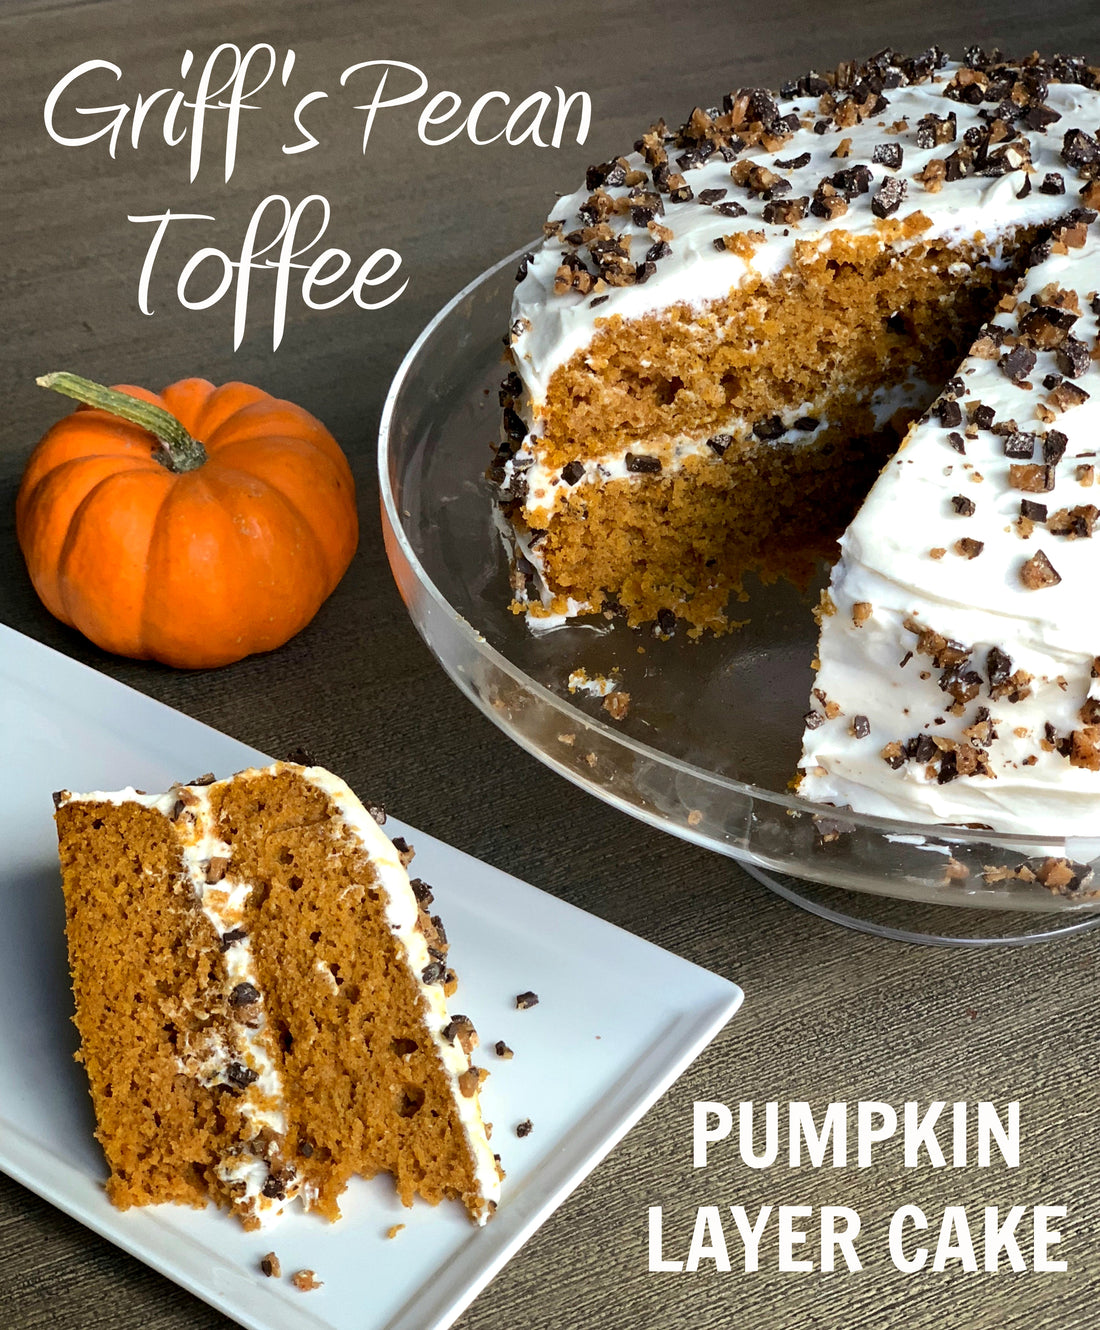 Griff's Toffee Pumpkin Layer Cake